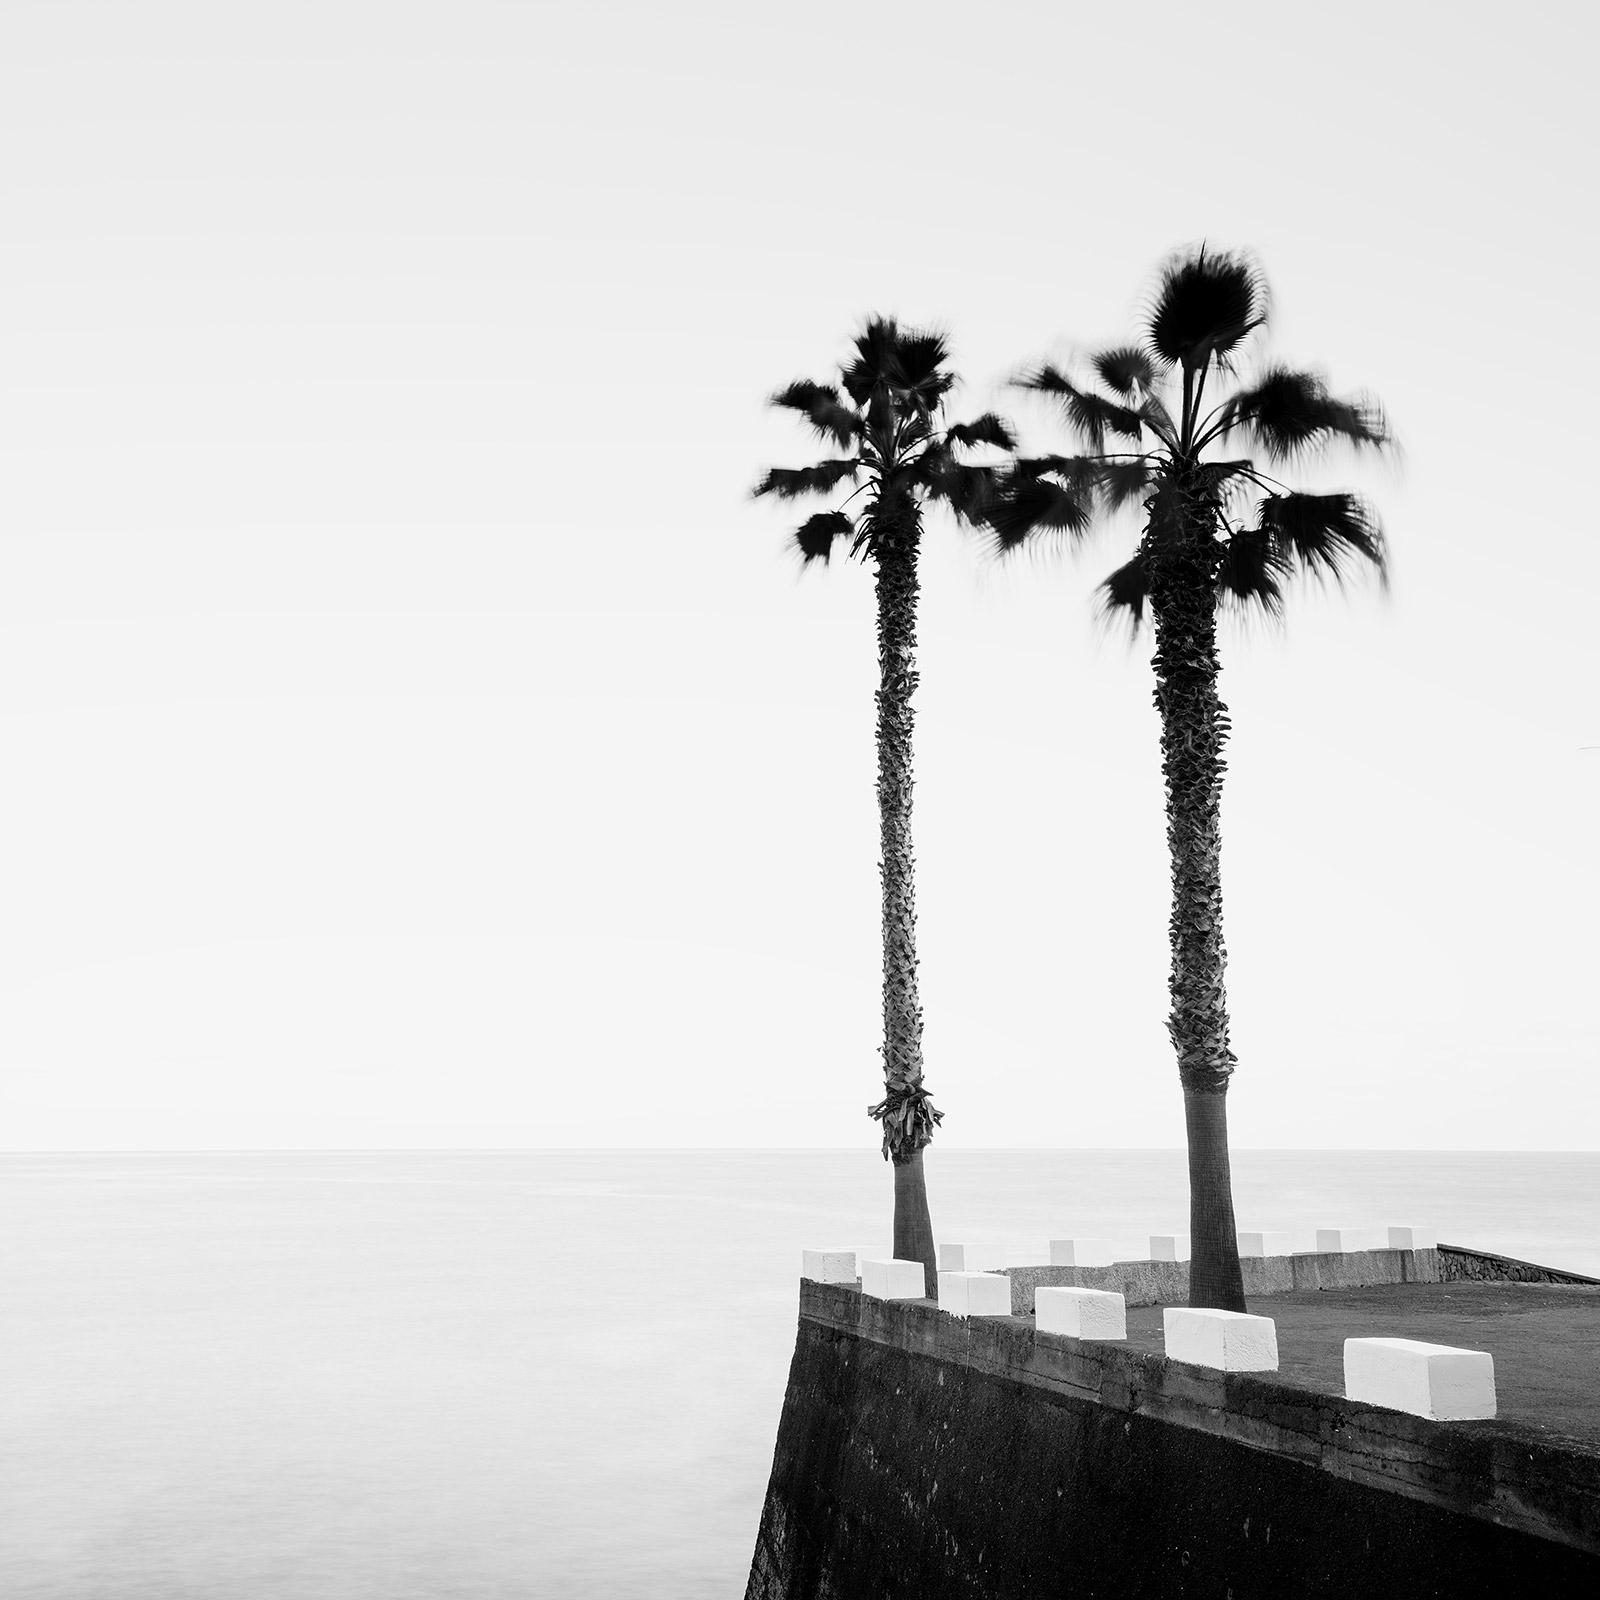 Parking lot with Palm Trees black and white fine art landscape photography print